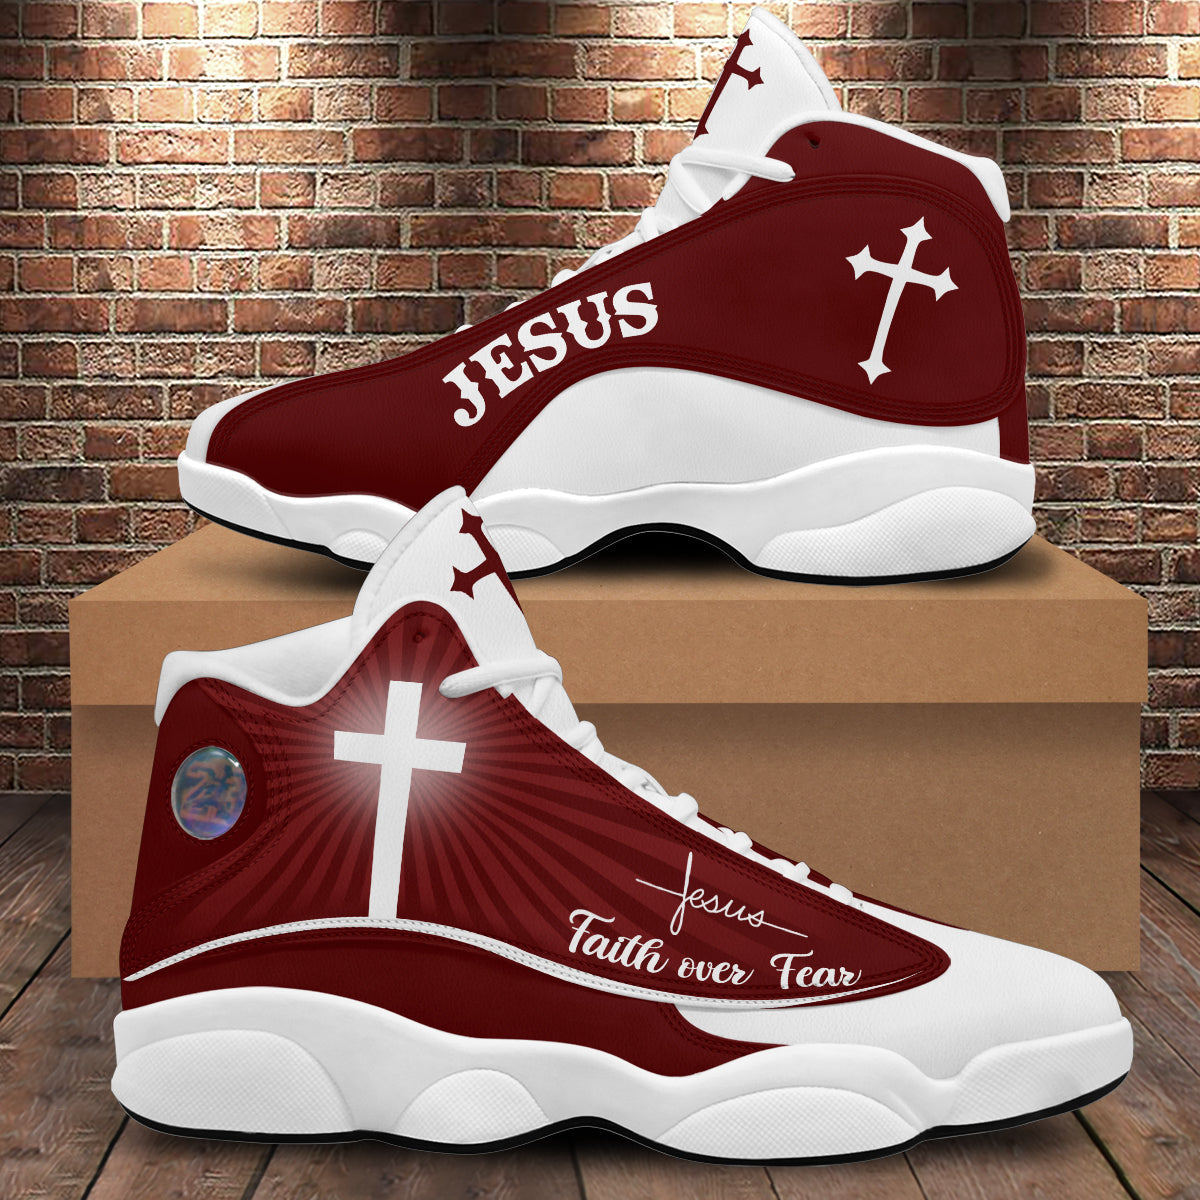 Teesdily | Jesus Faith Over Fear Basketball Shoes, Jesus Basketball Shoes Red Design, Gift For Jesus Lovers, Christian Gifts Unisex Basketball Shoes With Thick Soles